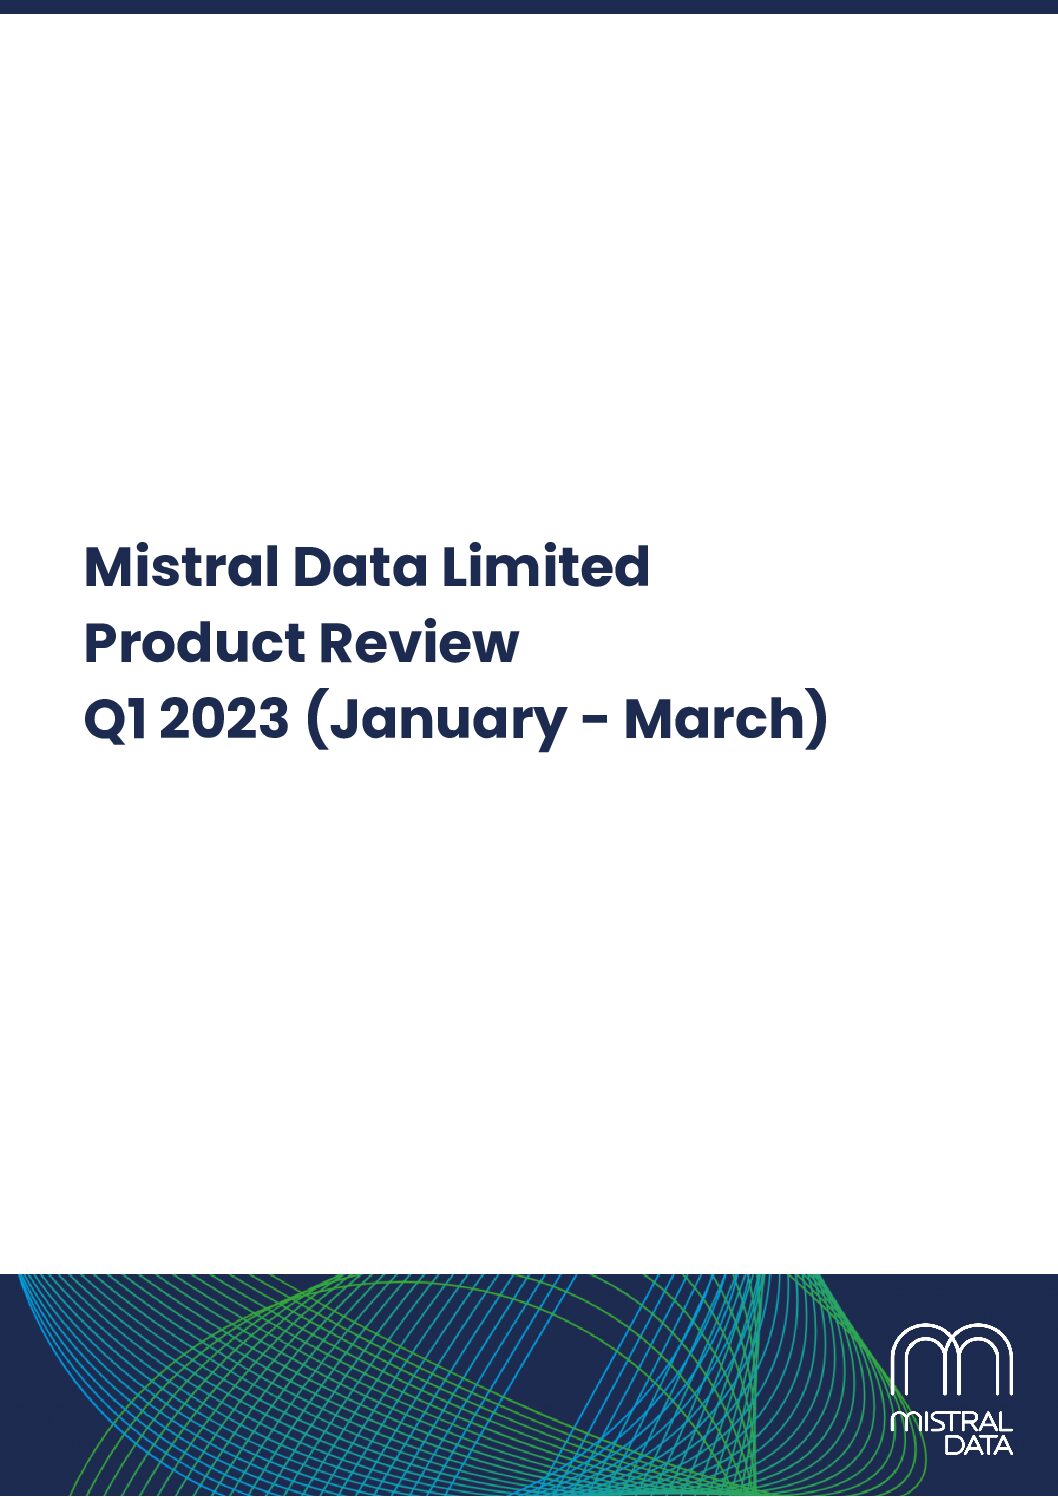 Mistral Data Limited Product Review Q1 2023